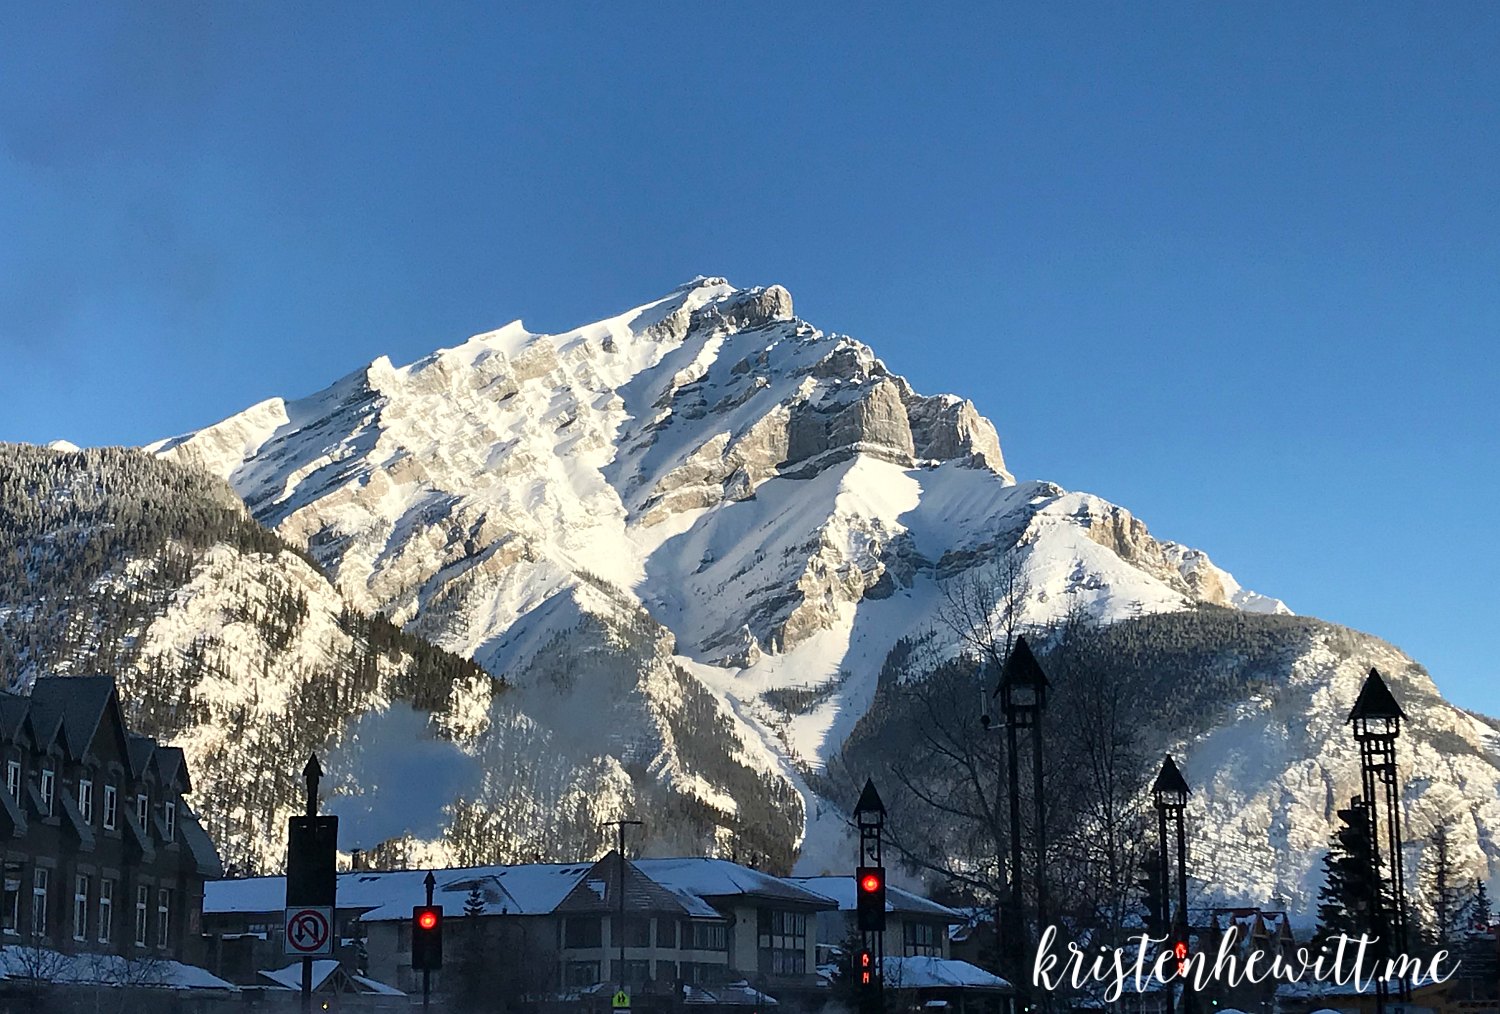 Looking for the perfect place to go on a family ski trip? Try Banff in the Canadian Rockies and the family-friendly resort Sunshine Village!